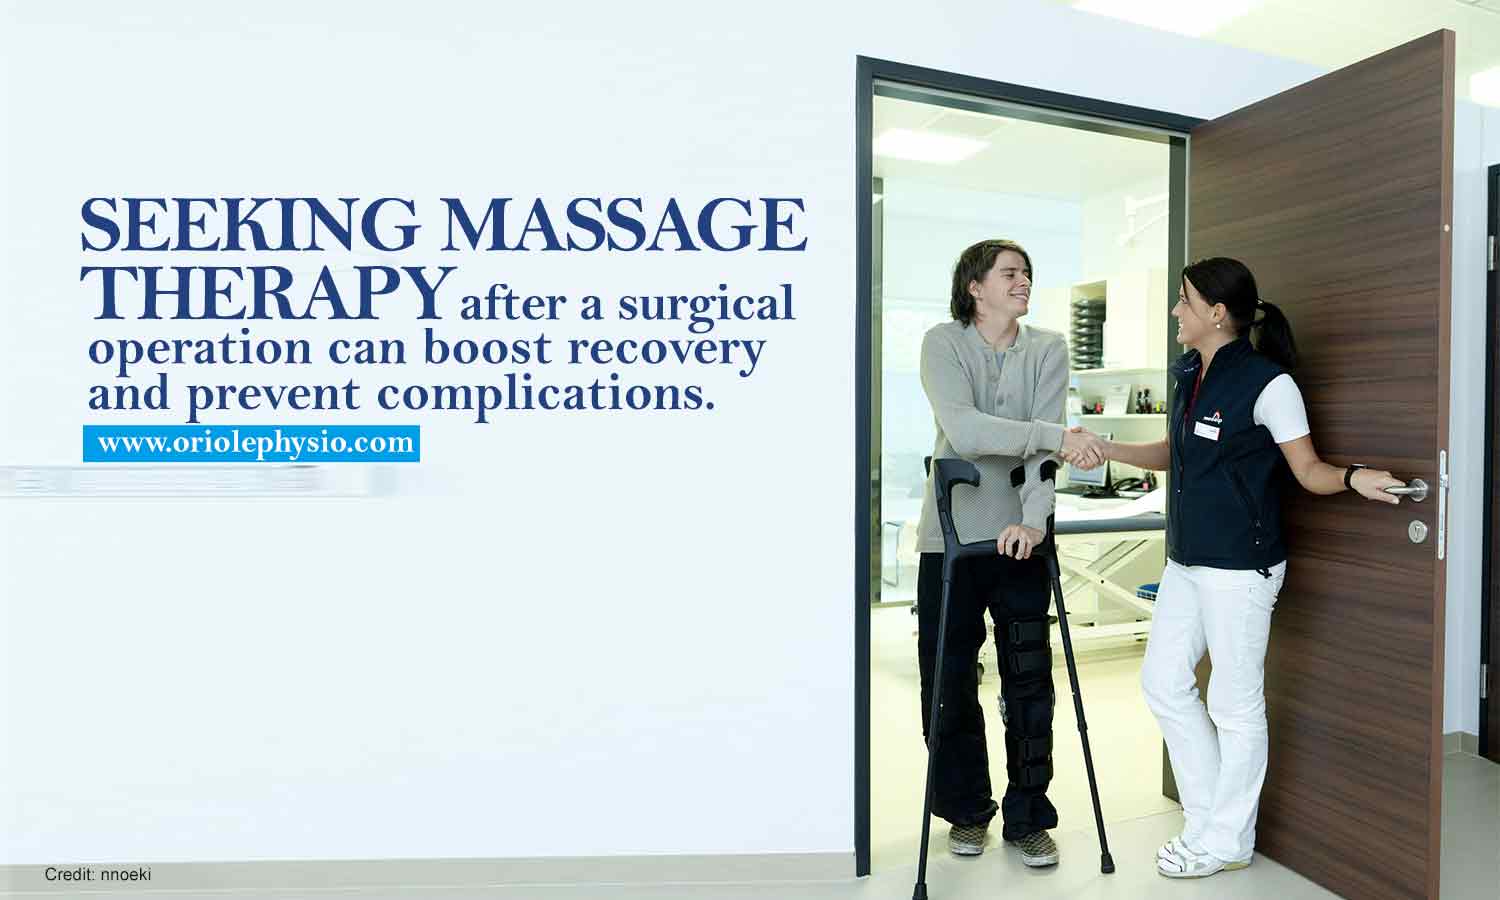 Seeking massage therapy after a surgical operation can boost recovery and prevent complications